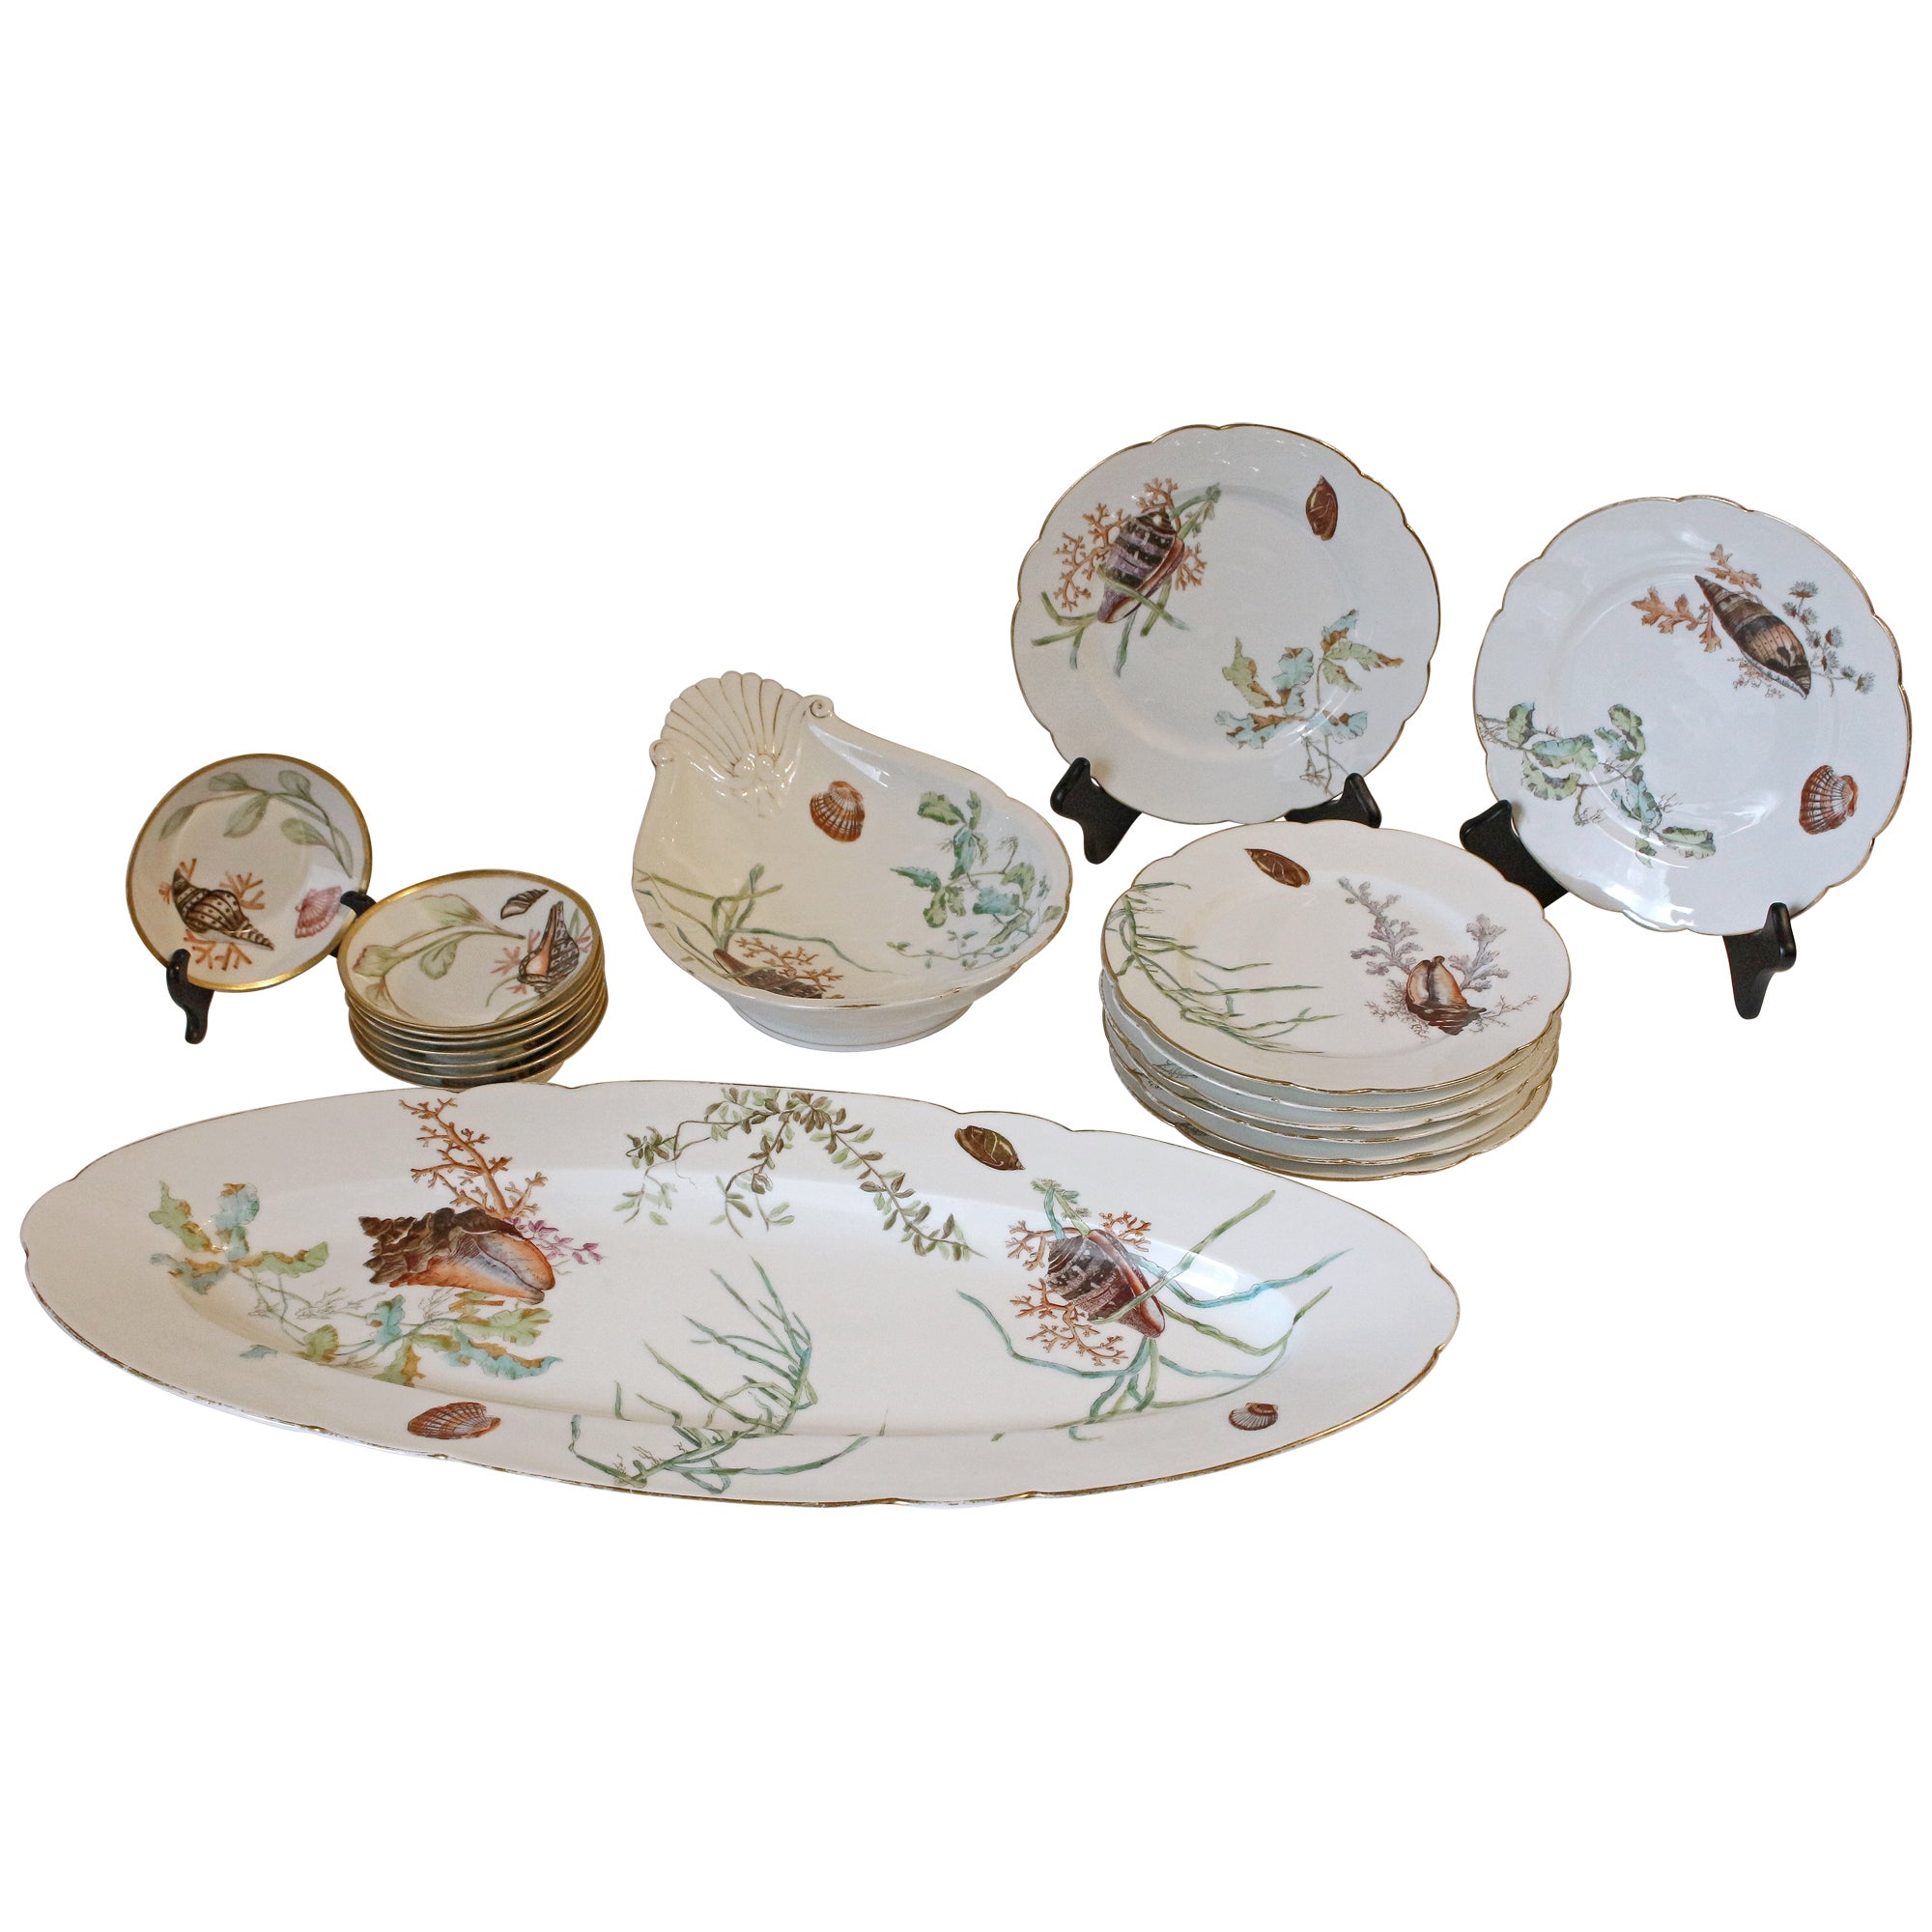 Circa 1880-1900 Seashells & Seaweed Motif Fish Service by Limoges For Sale